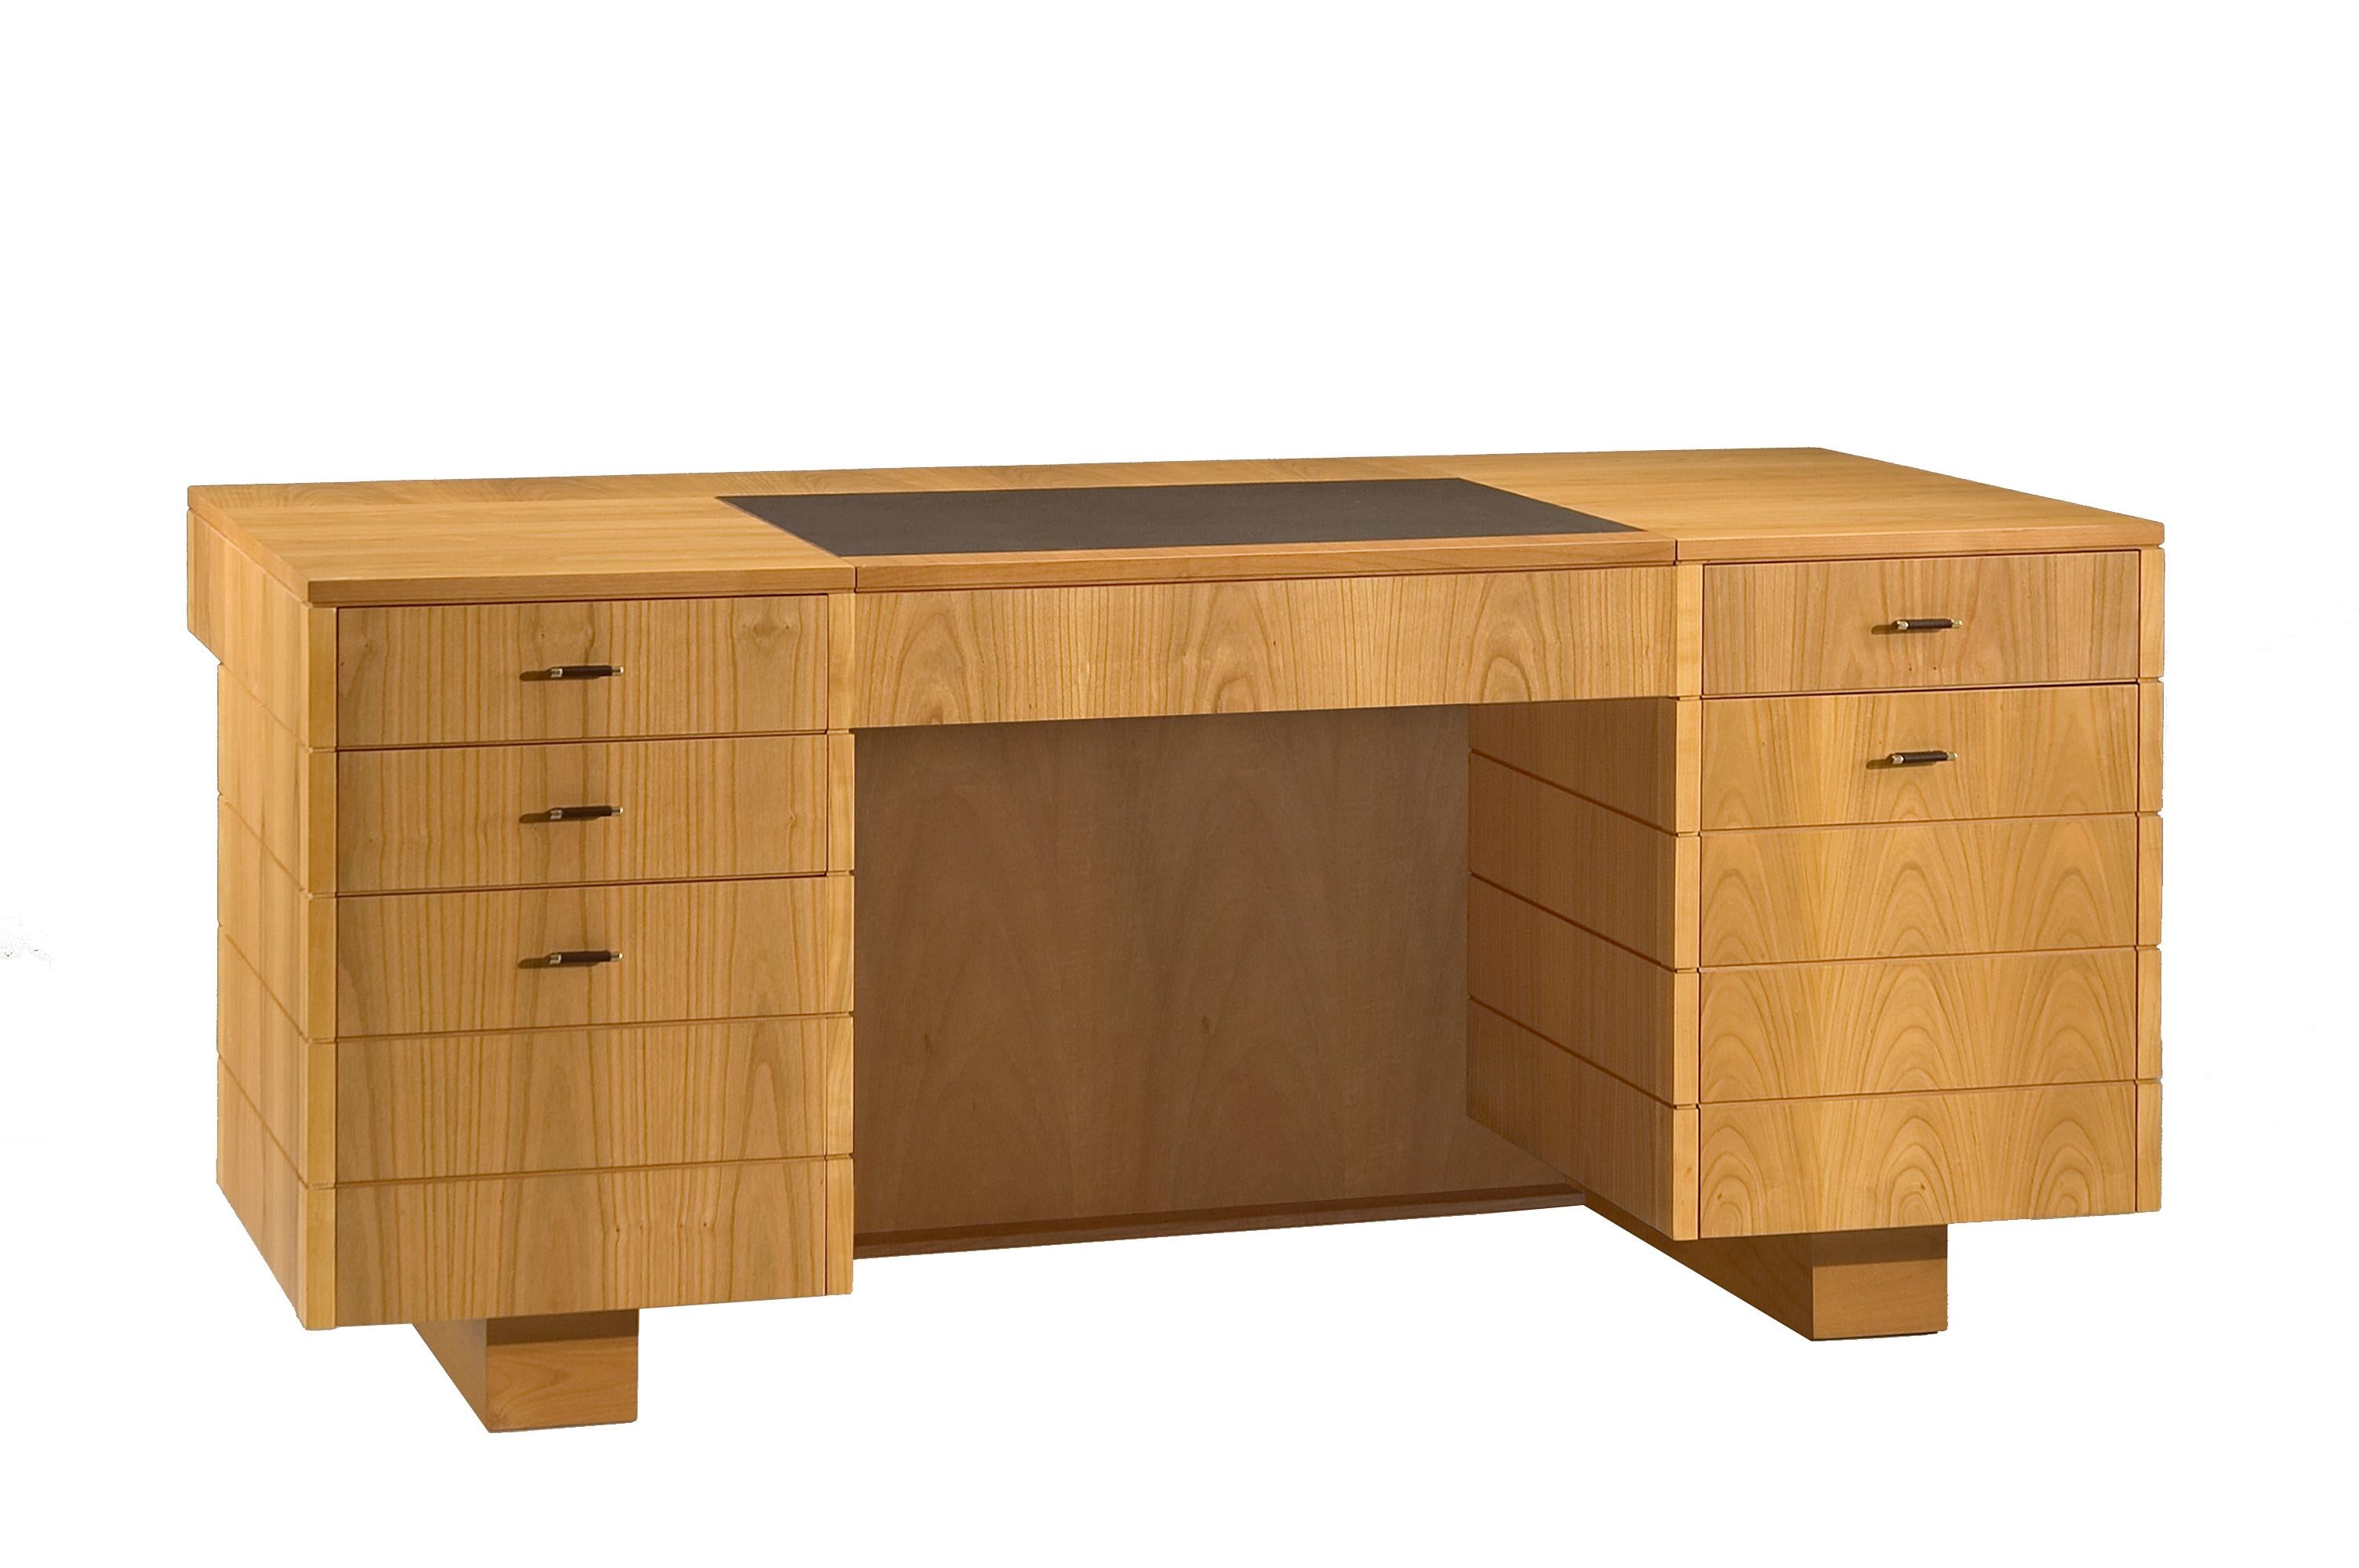 Hand-Crafted '900 Style Wooden Desk in Cherry Wood with Leather Top and Drawers, by Morelato